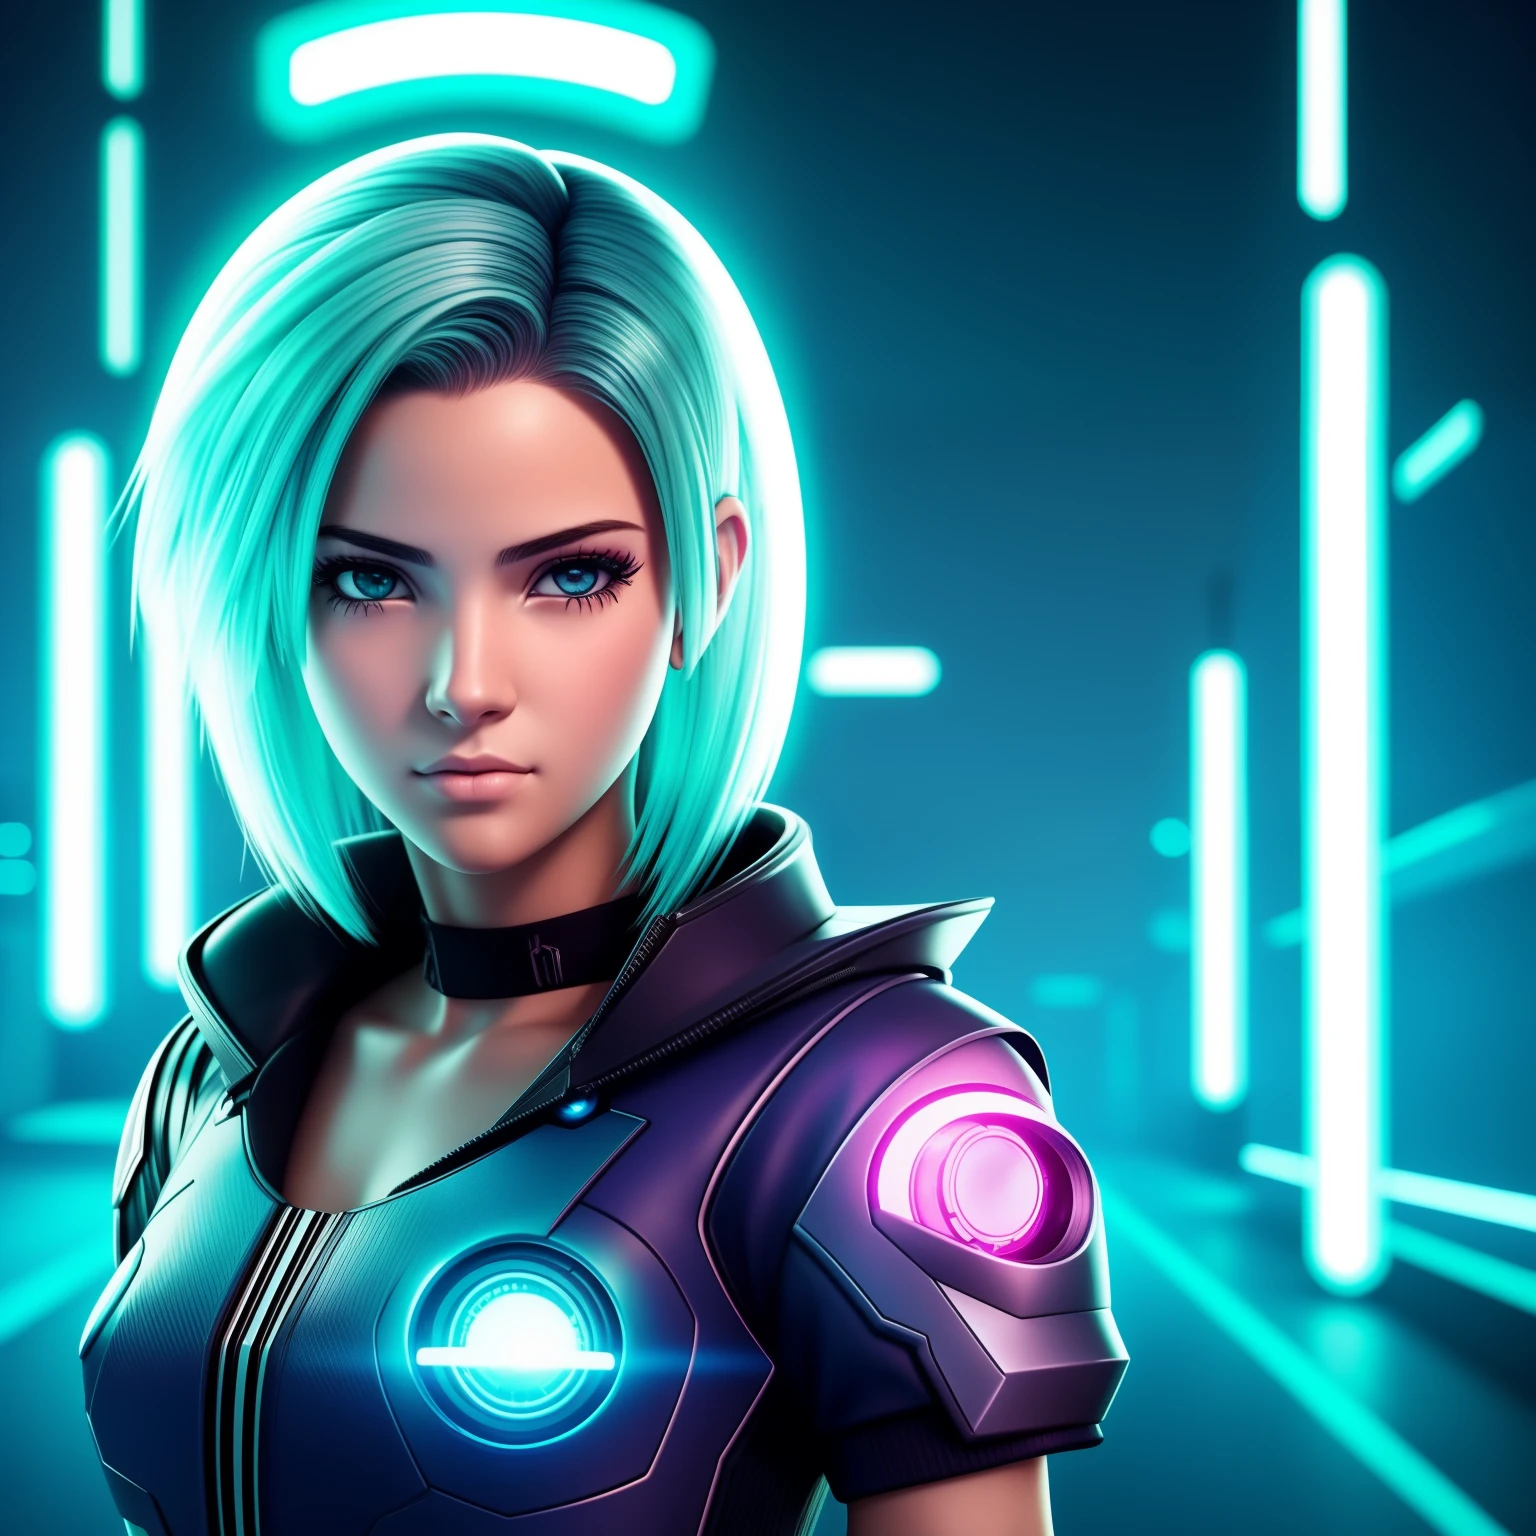 teenage cyberpunk girl, approximately 16 years of age. She must have long white hair with purple highlights. Your eyes emit a red glow. She is in a futuristic urban environment, neon-lit